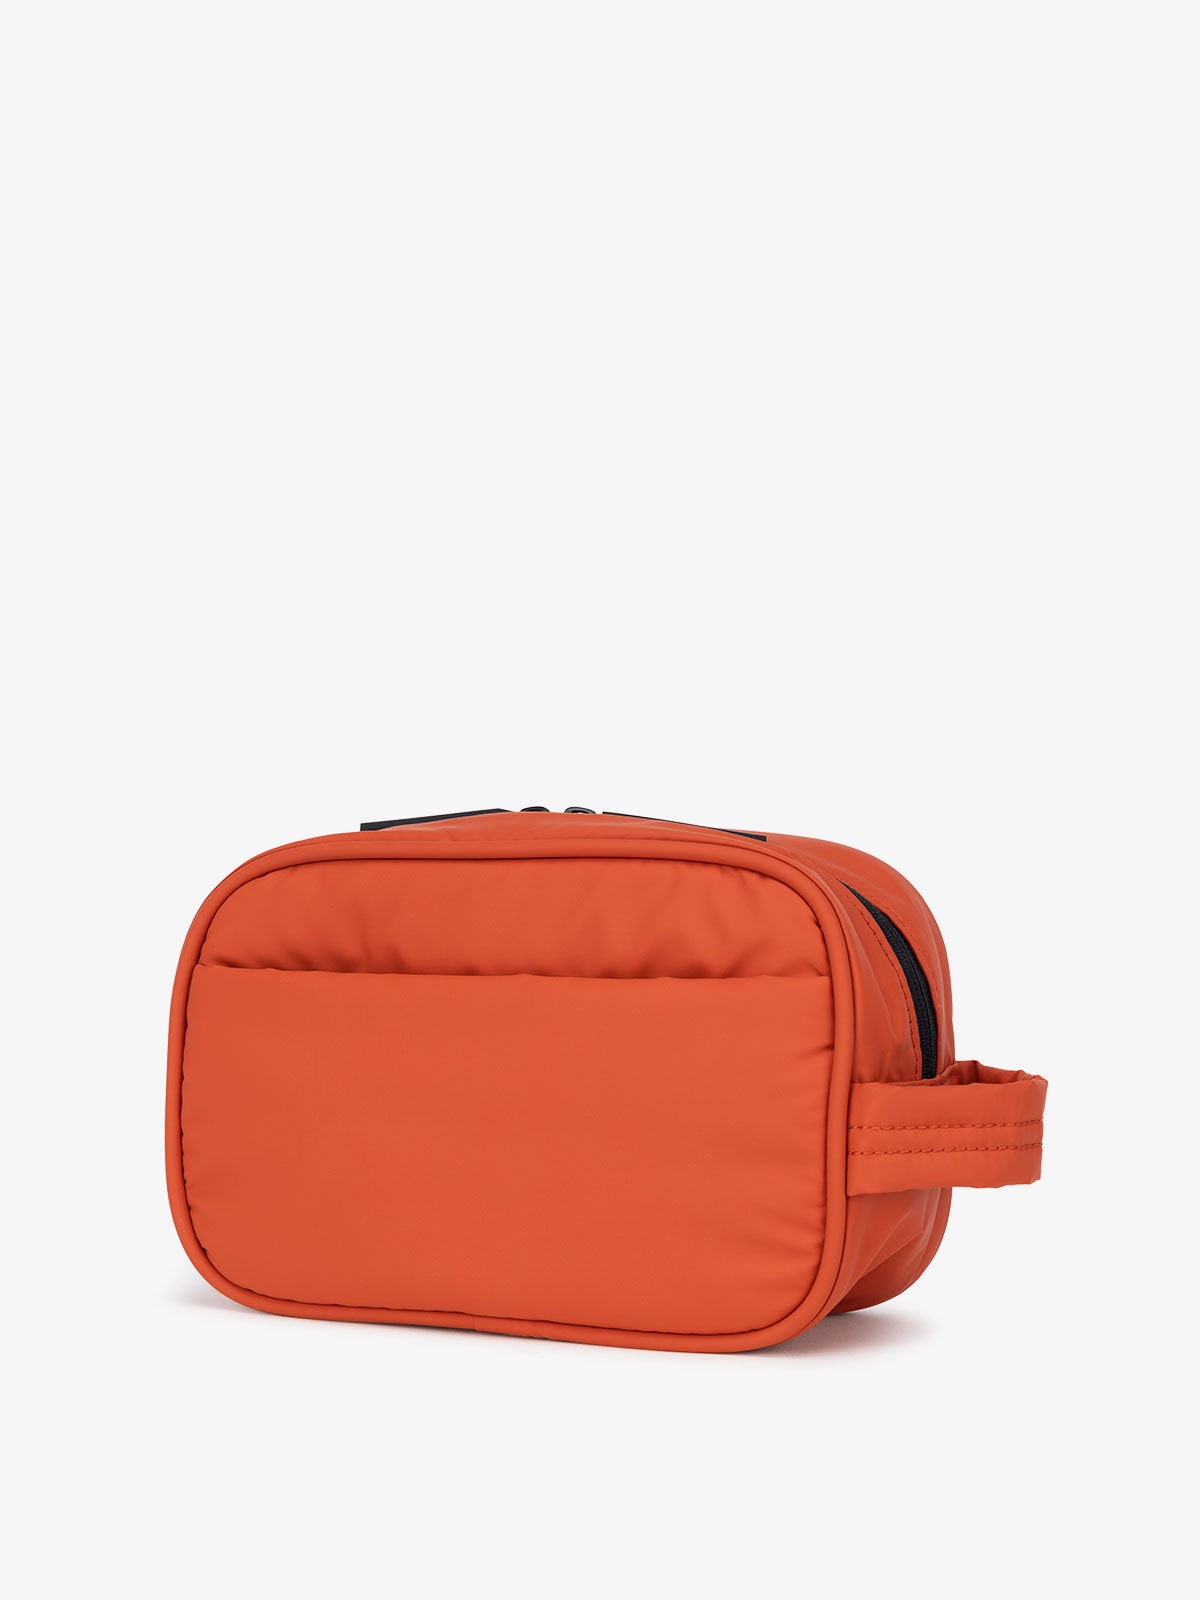 toiletry bag for travel in red orange